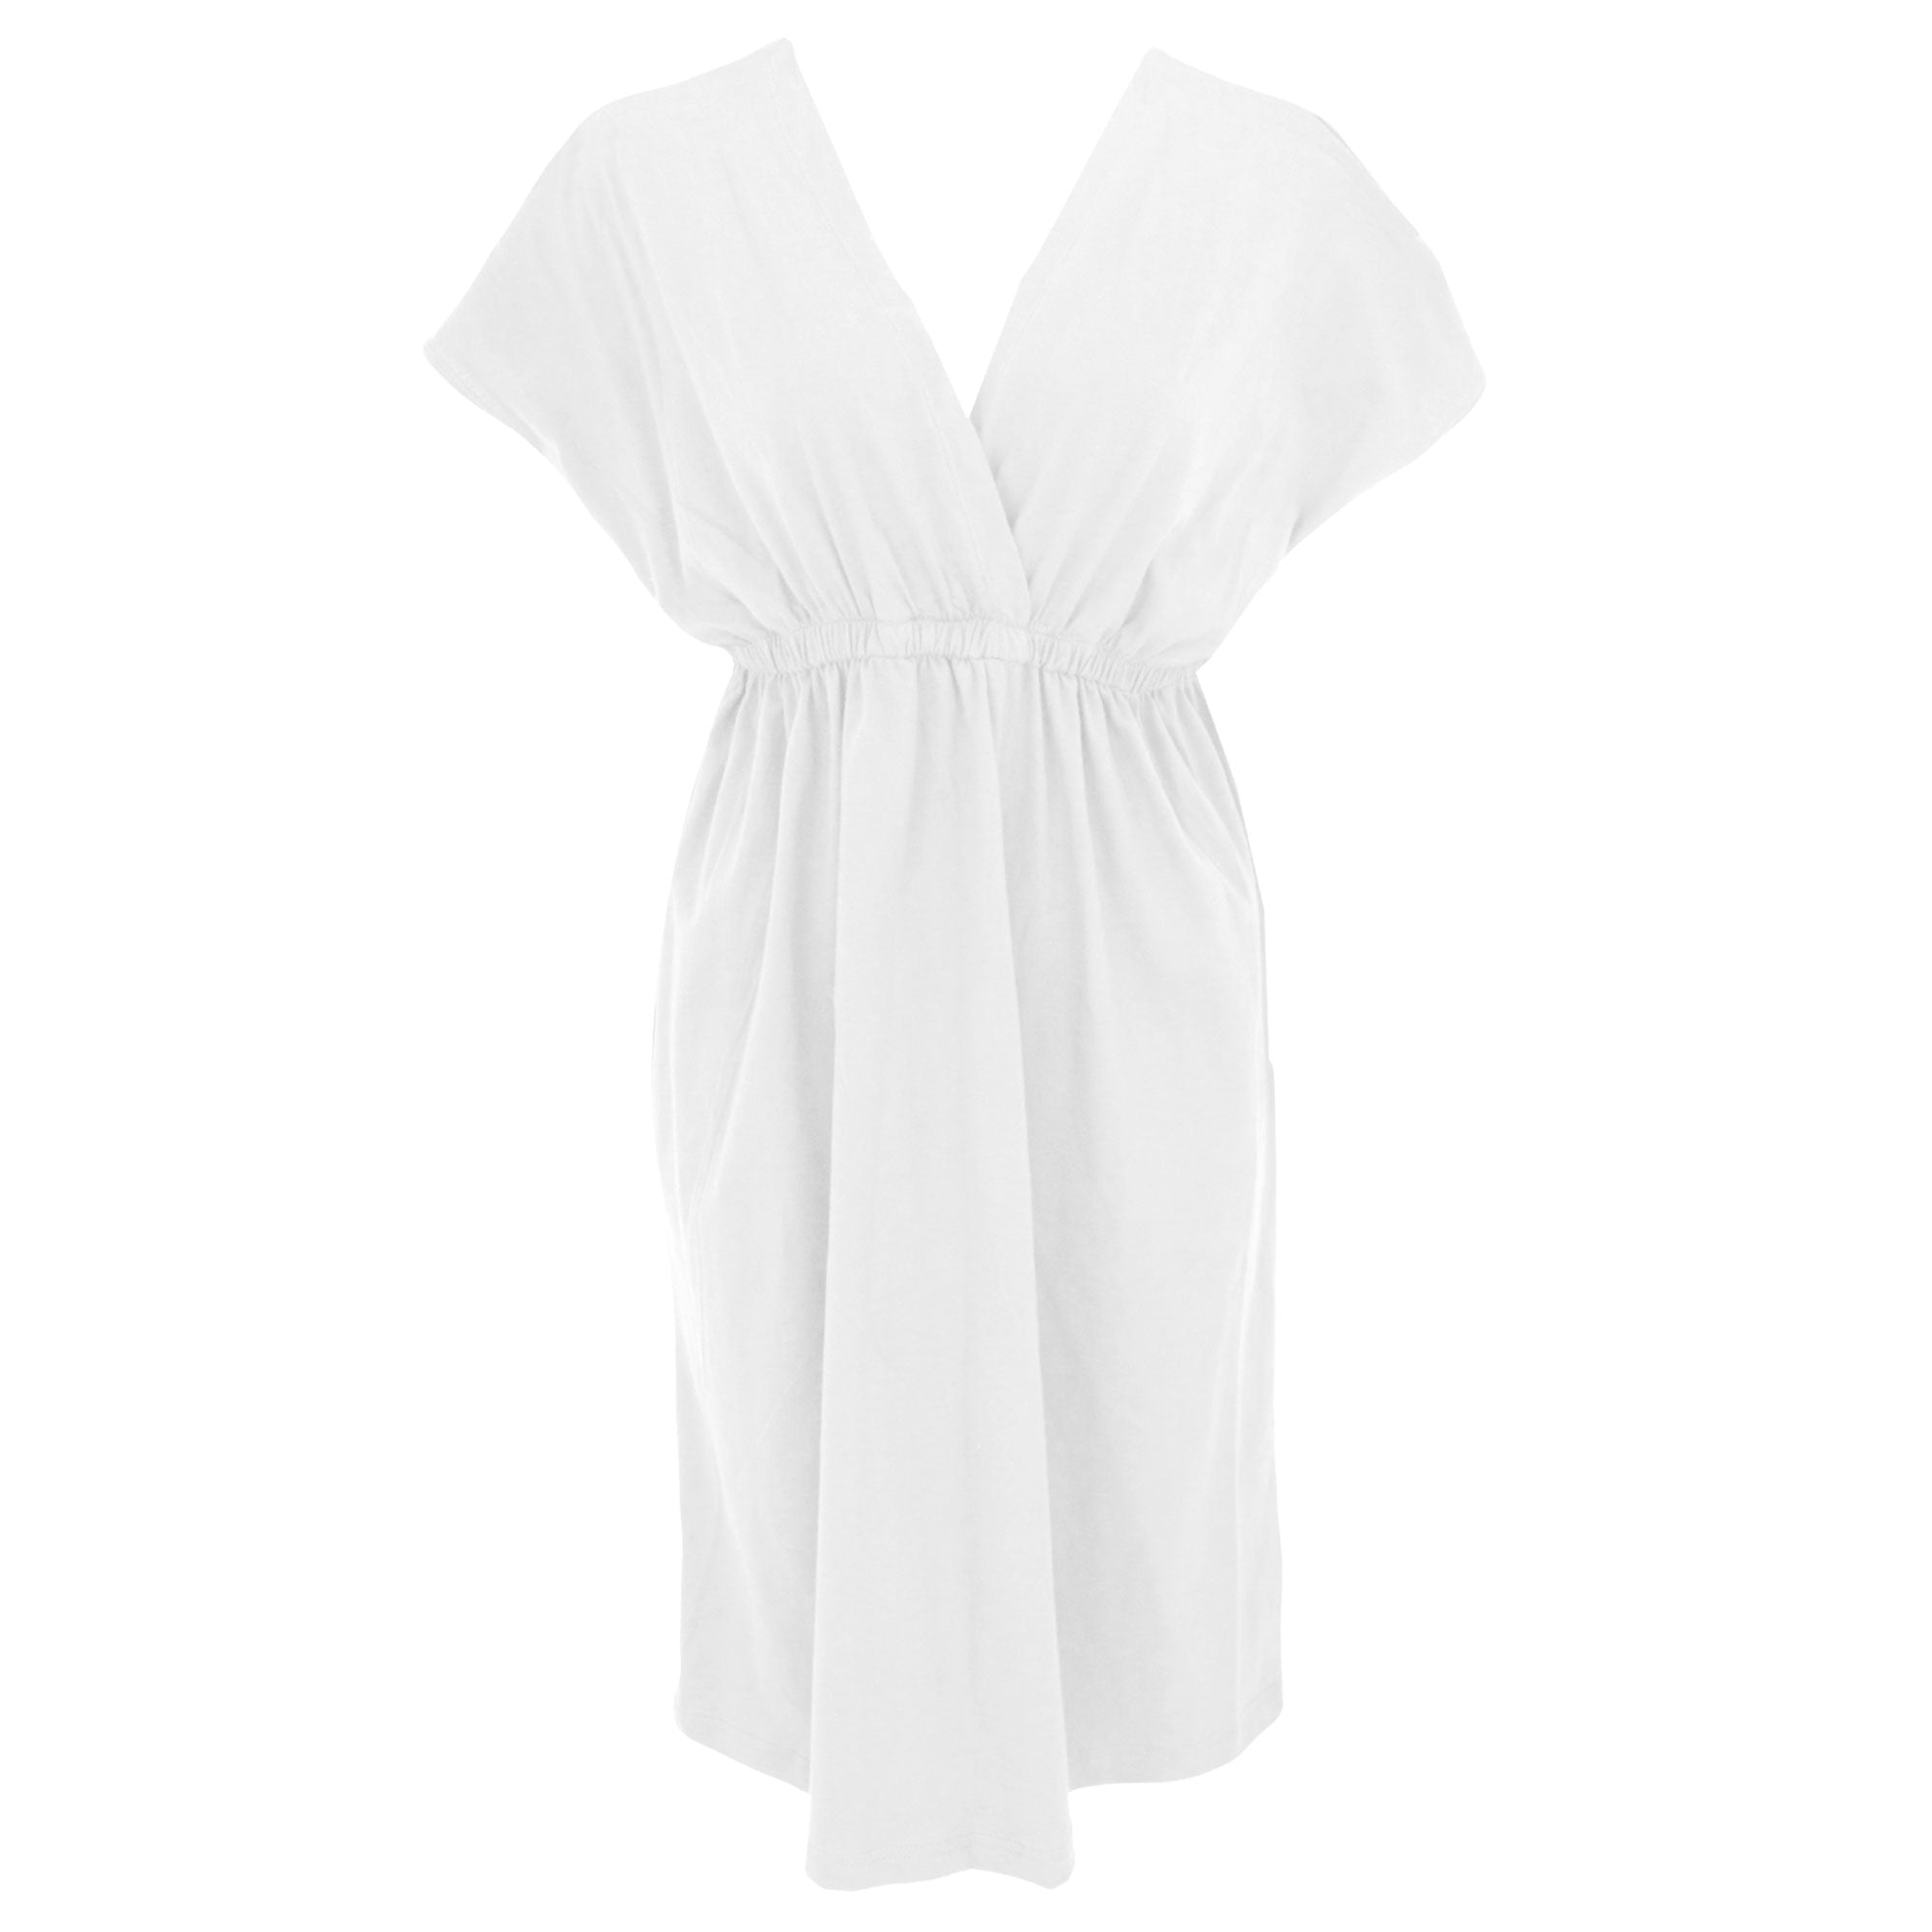 Organic Africa Party Dress - White - M